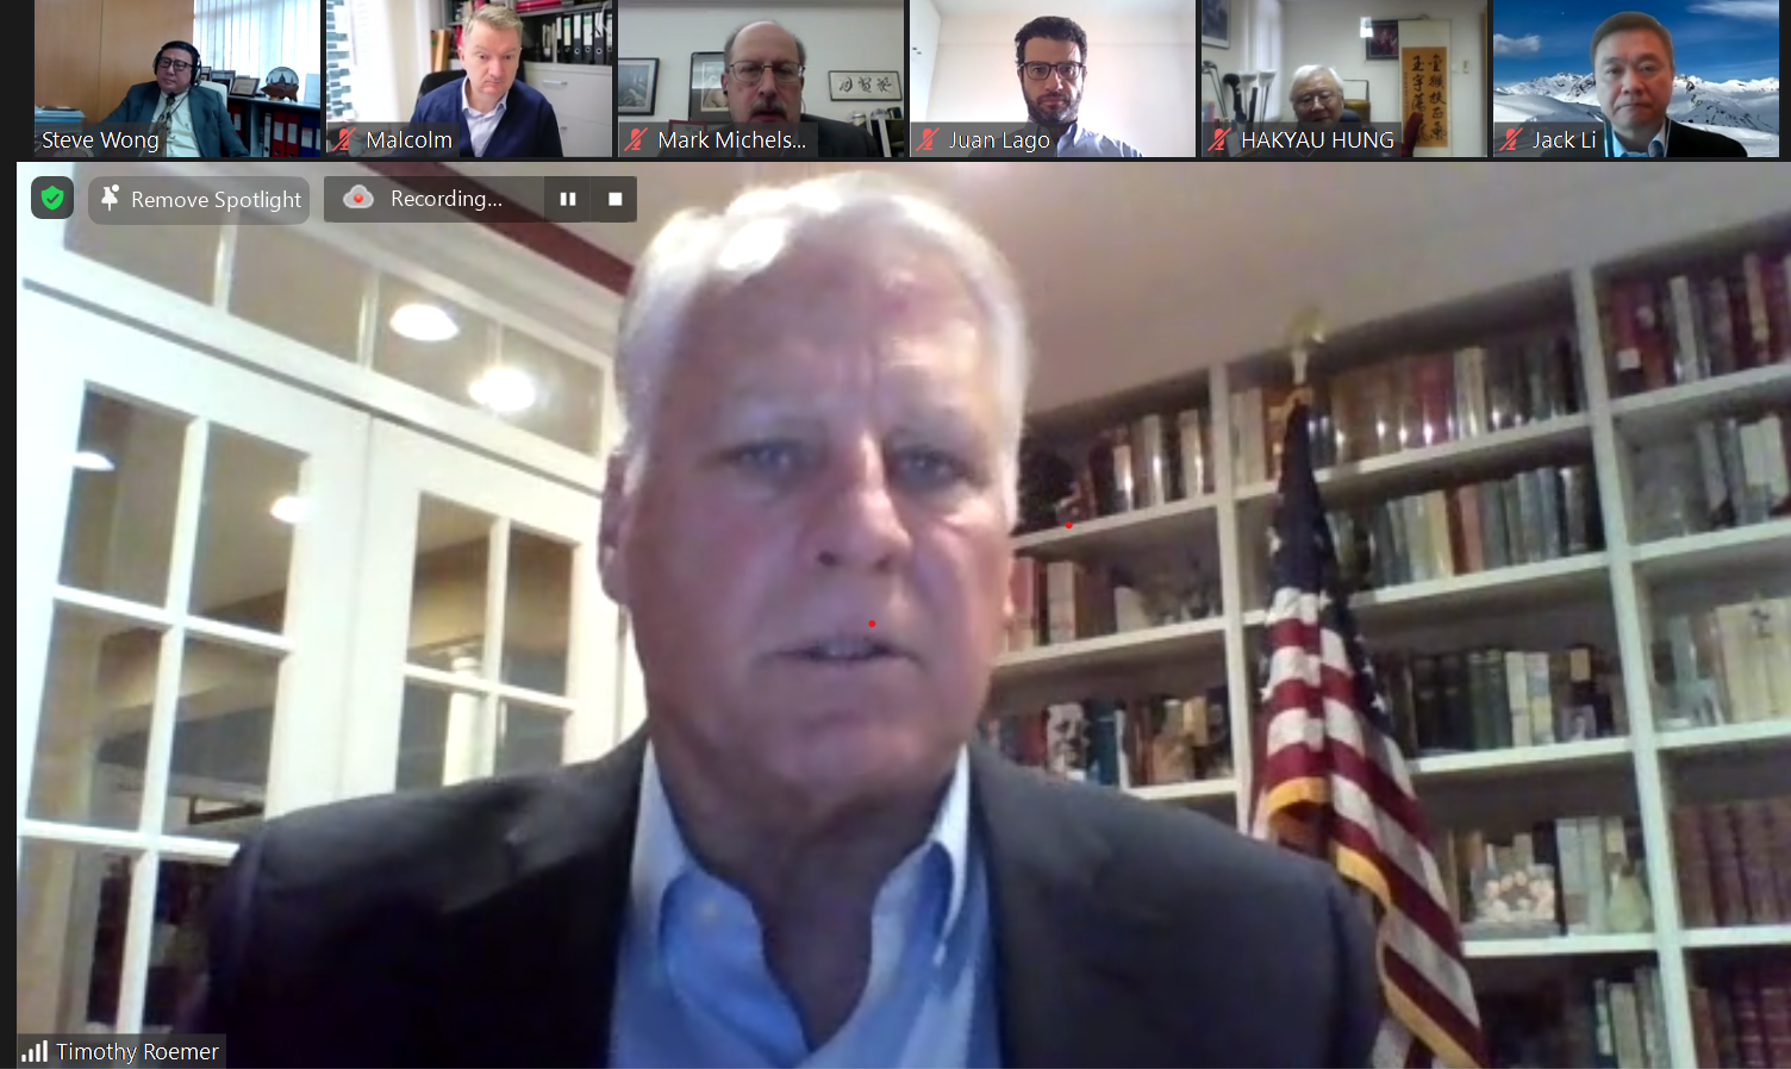 Timothy Roemer, former Congressman and ex-U.S. Ambassador to India and also Executive Director and Strategic Counselor at APCO Worldwide, spoke at the Americas Committee meeting on 20 January.